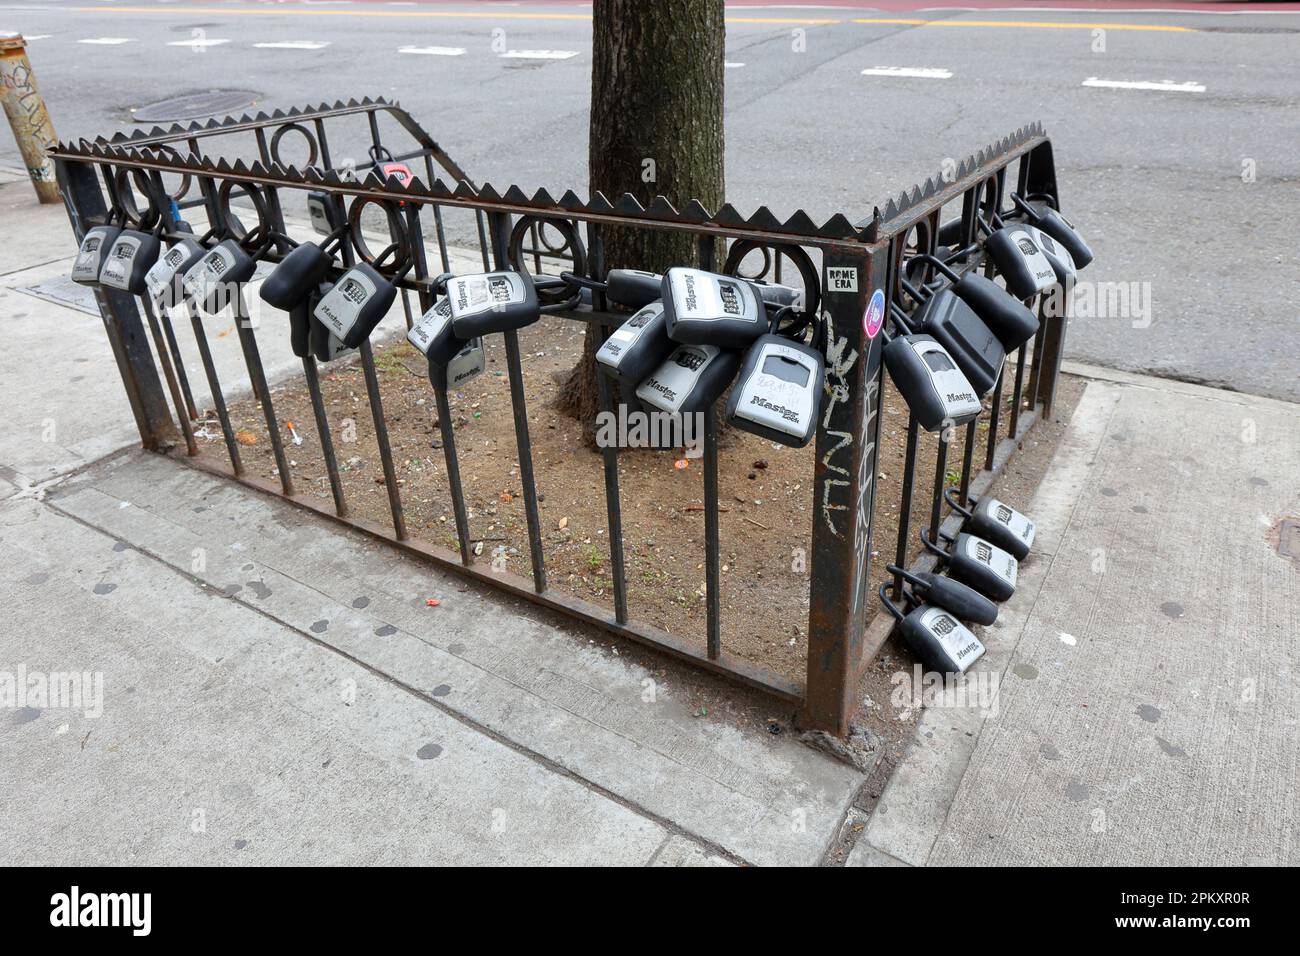 Dozens of lock boxes and key safes for pet sitter, guest self-service check-in, locked to a tree planter in Manhattan's East Village in New York. Stock Photo